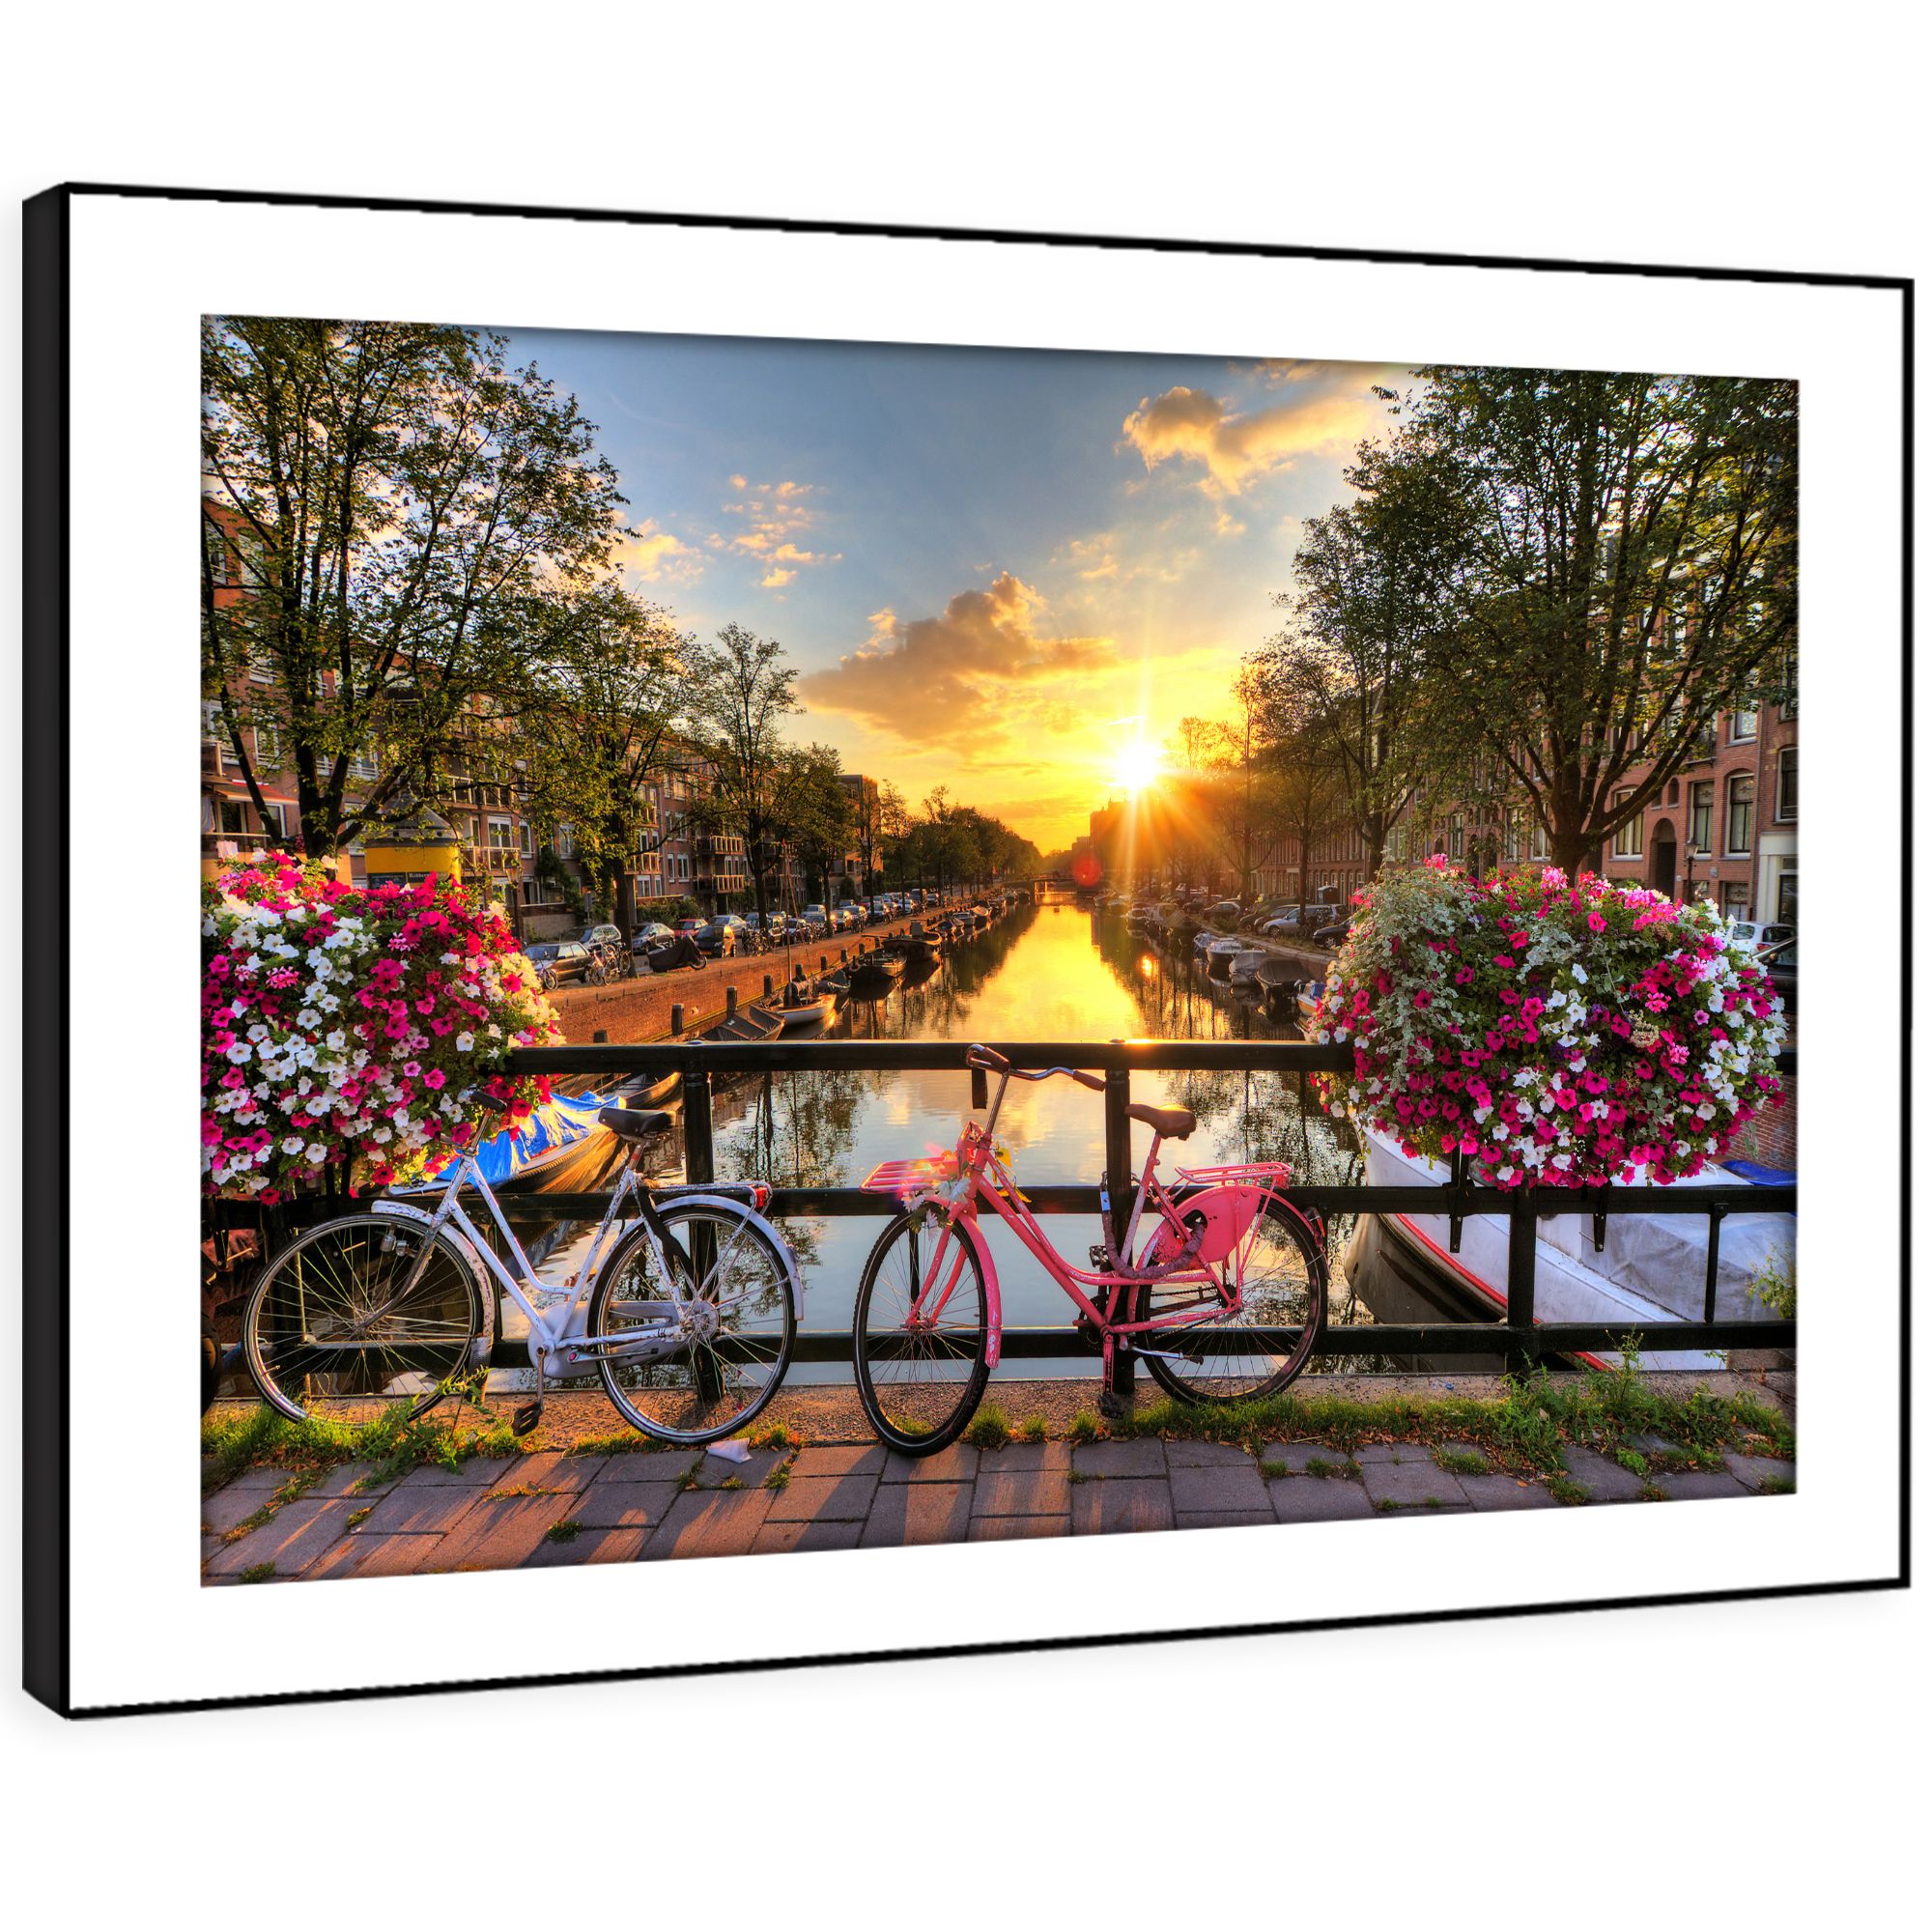 Sc455 Amsterdam Bicycle Bridge Landscape Framed Wall Art Large Picture With Recent Bridge Wall Art (View 11 of 20)